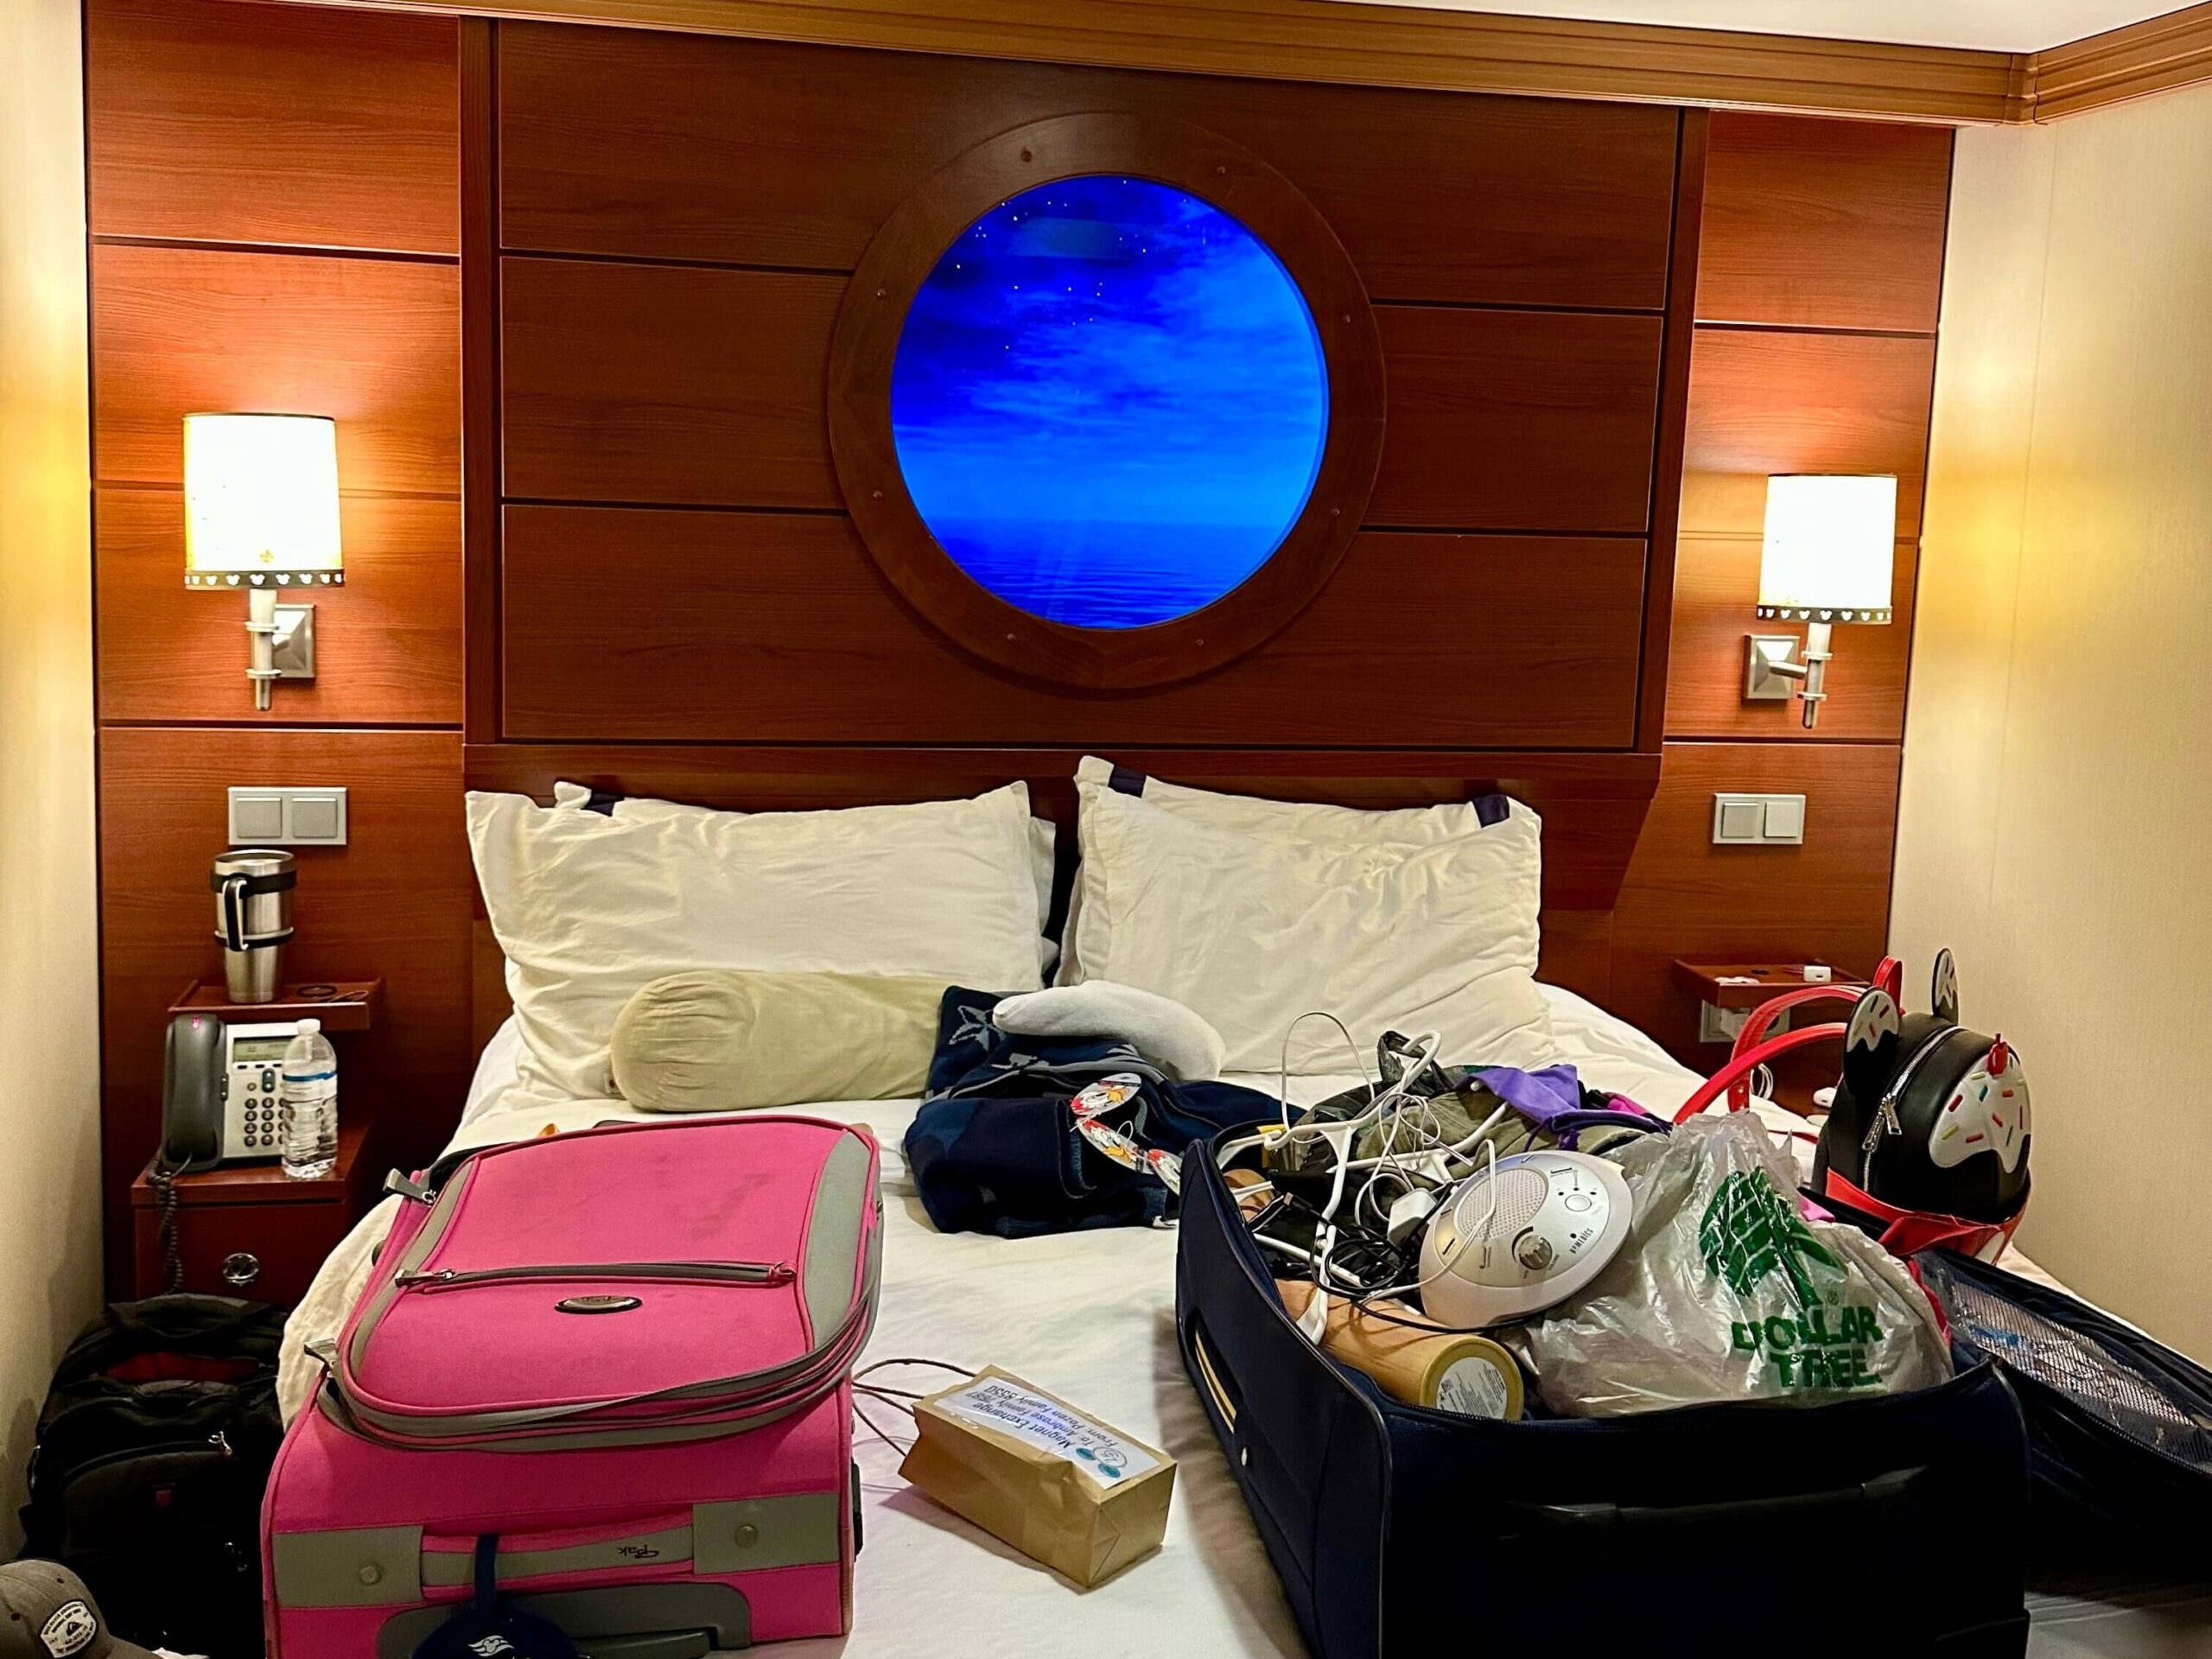 two suitcases on the bed, the one on the right is open, then one of the left is closed